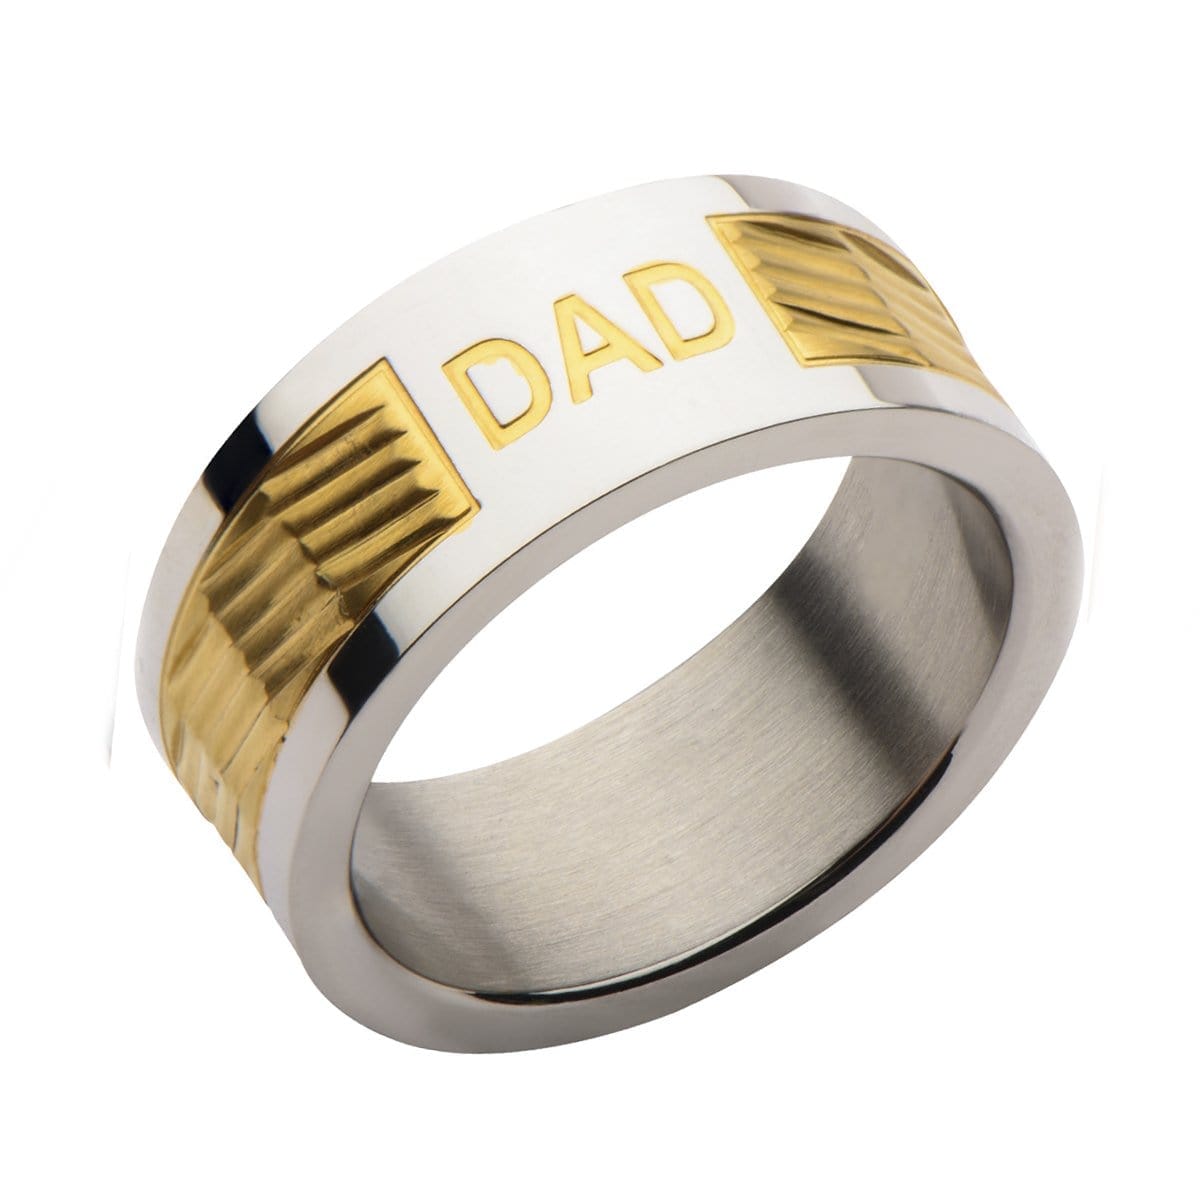 INOX JEWELRY Rings Golden Tone and Silver Tone Stainless Steel Engraved DAD Patterned Band